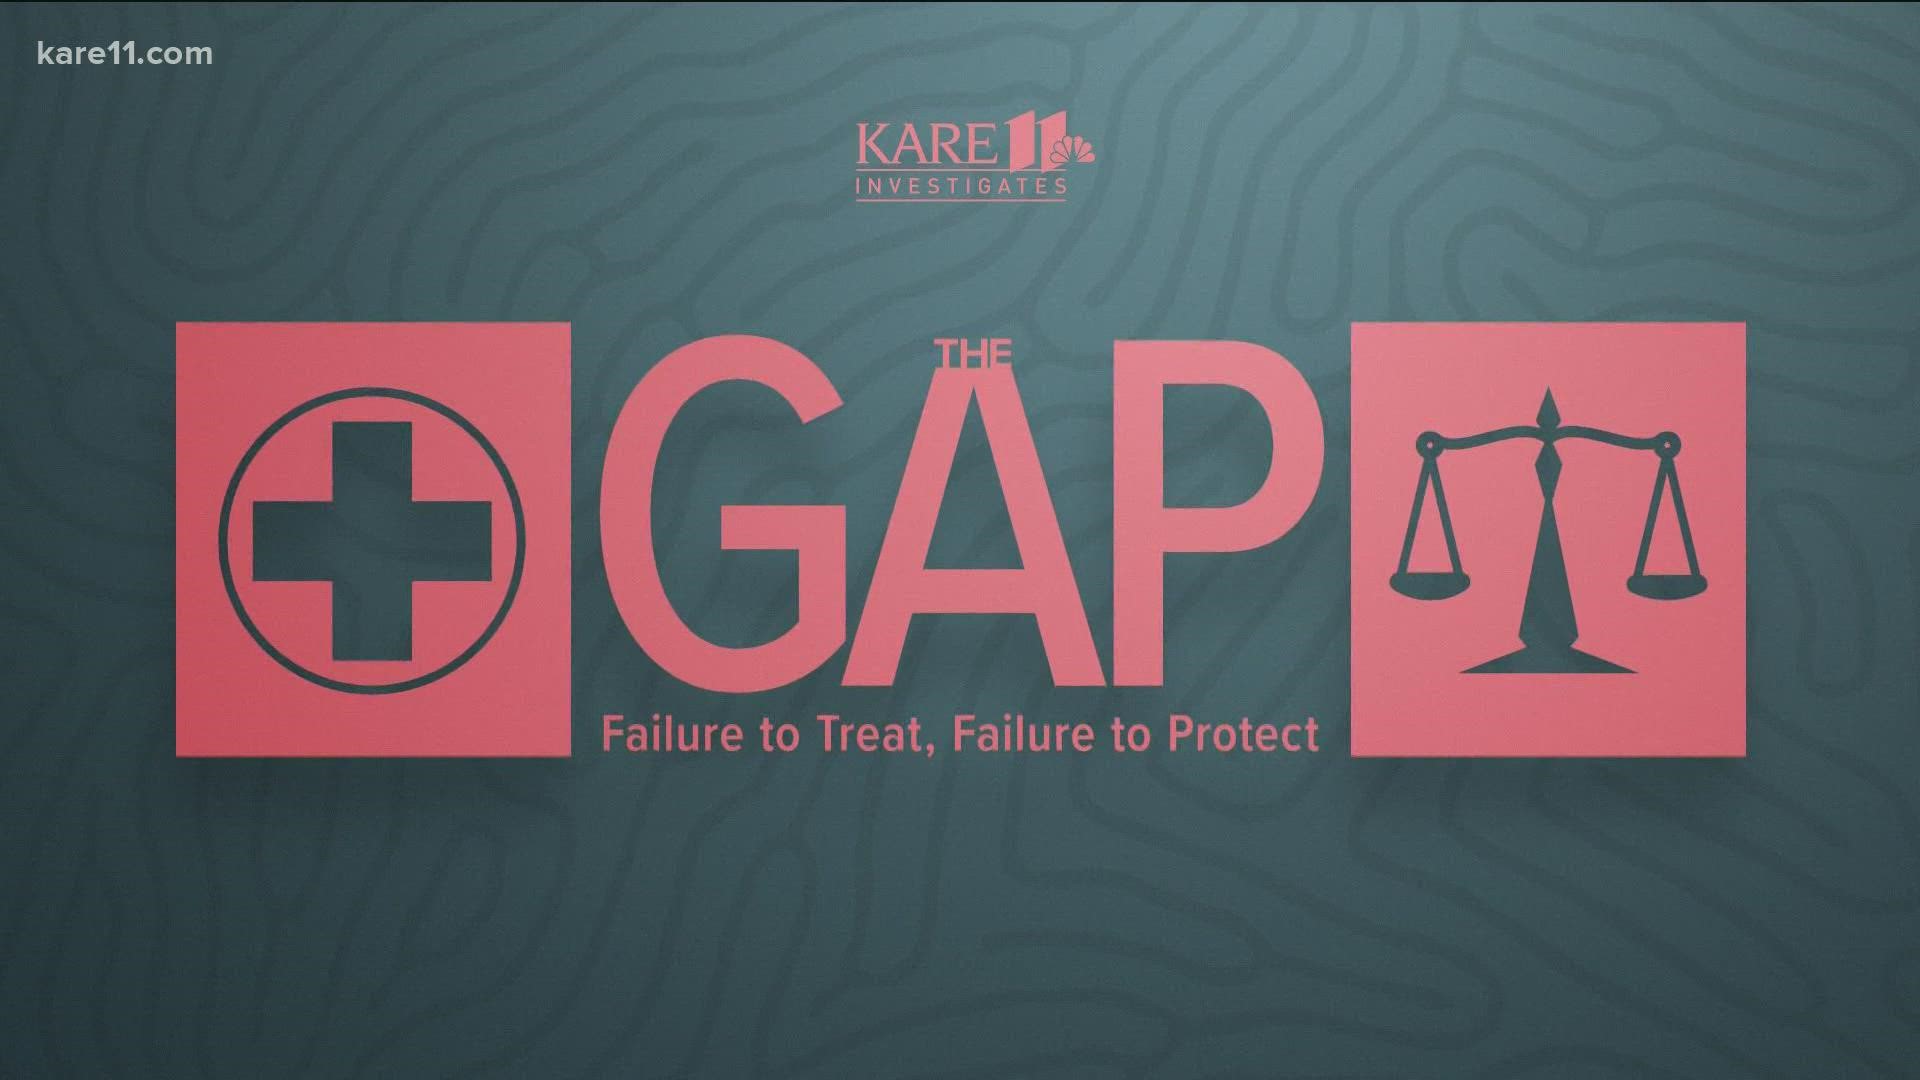 Part 5 – “The Gap: Failure to Treat, Failure to Protect” – Too mentally ill to be tried for rape, DHS and the courts said he’s safe to live on the streets.